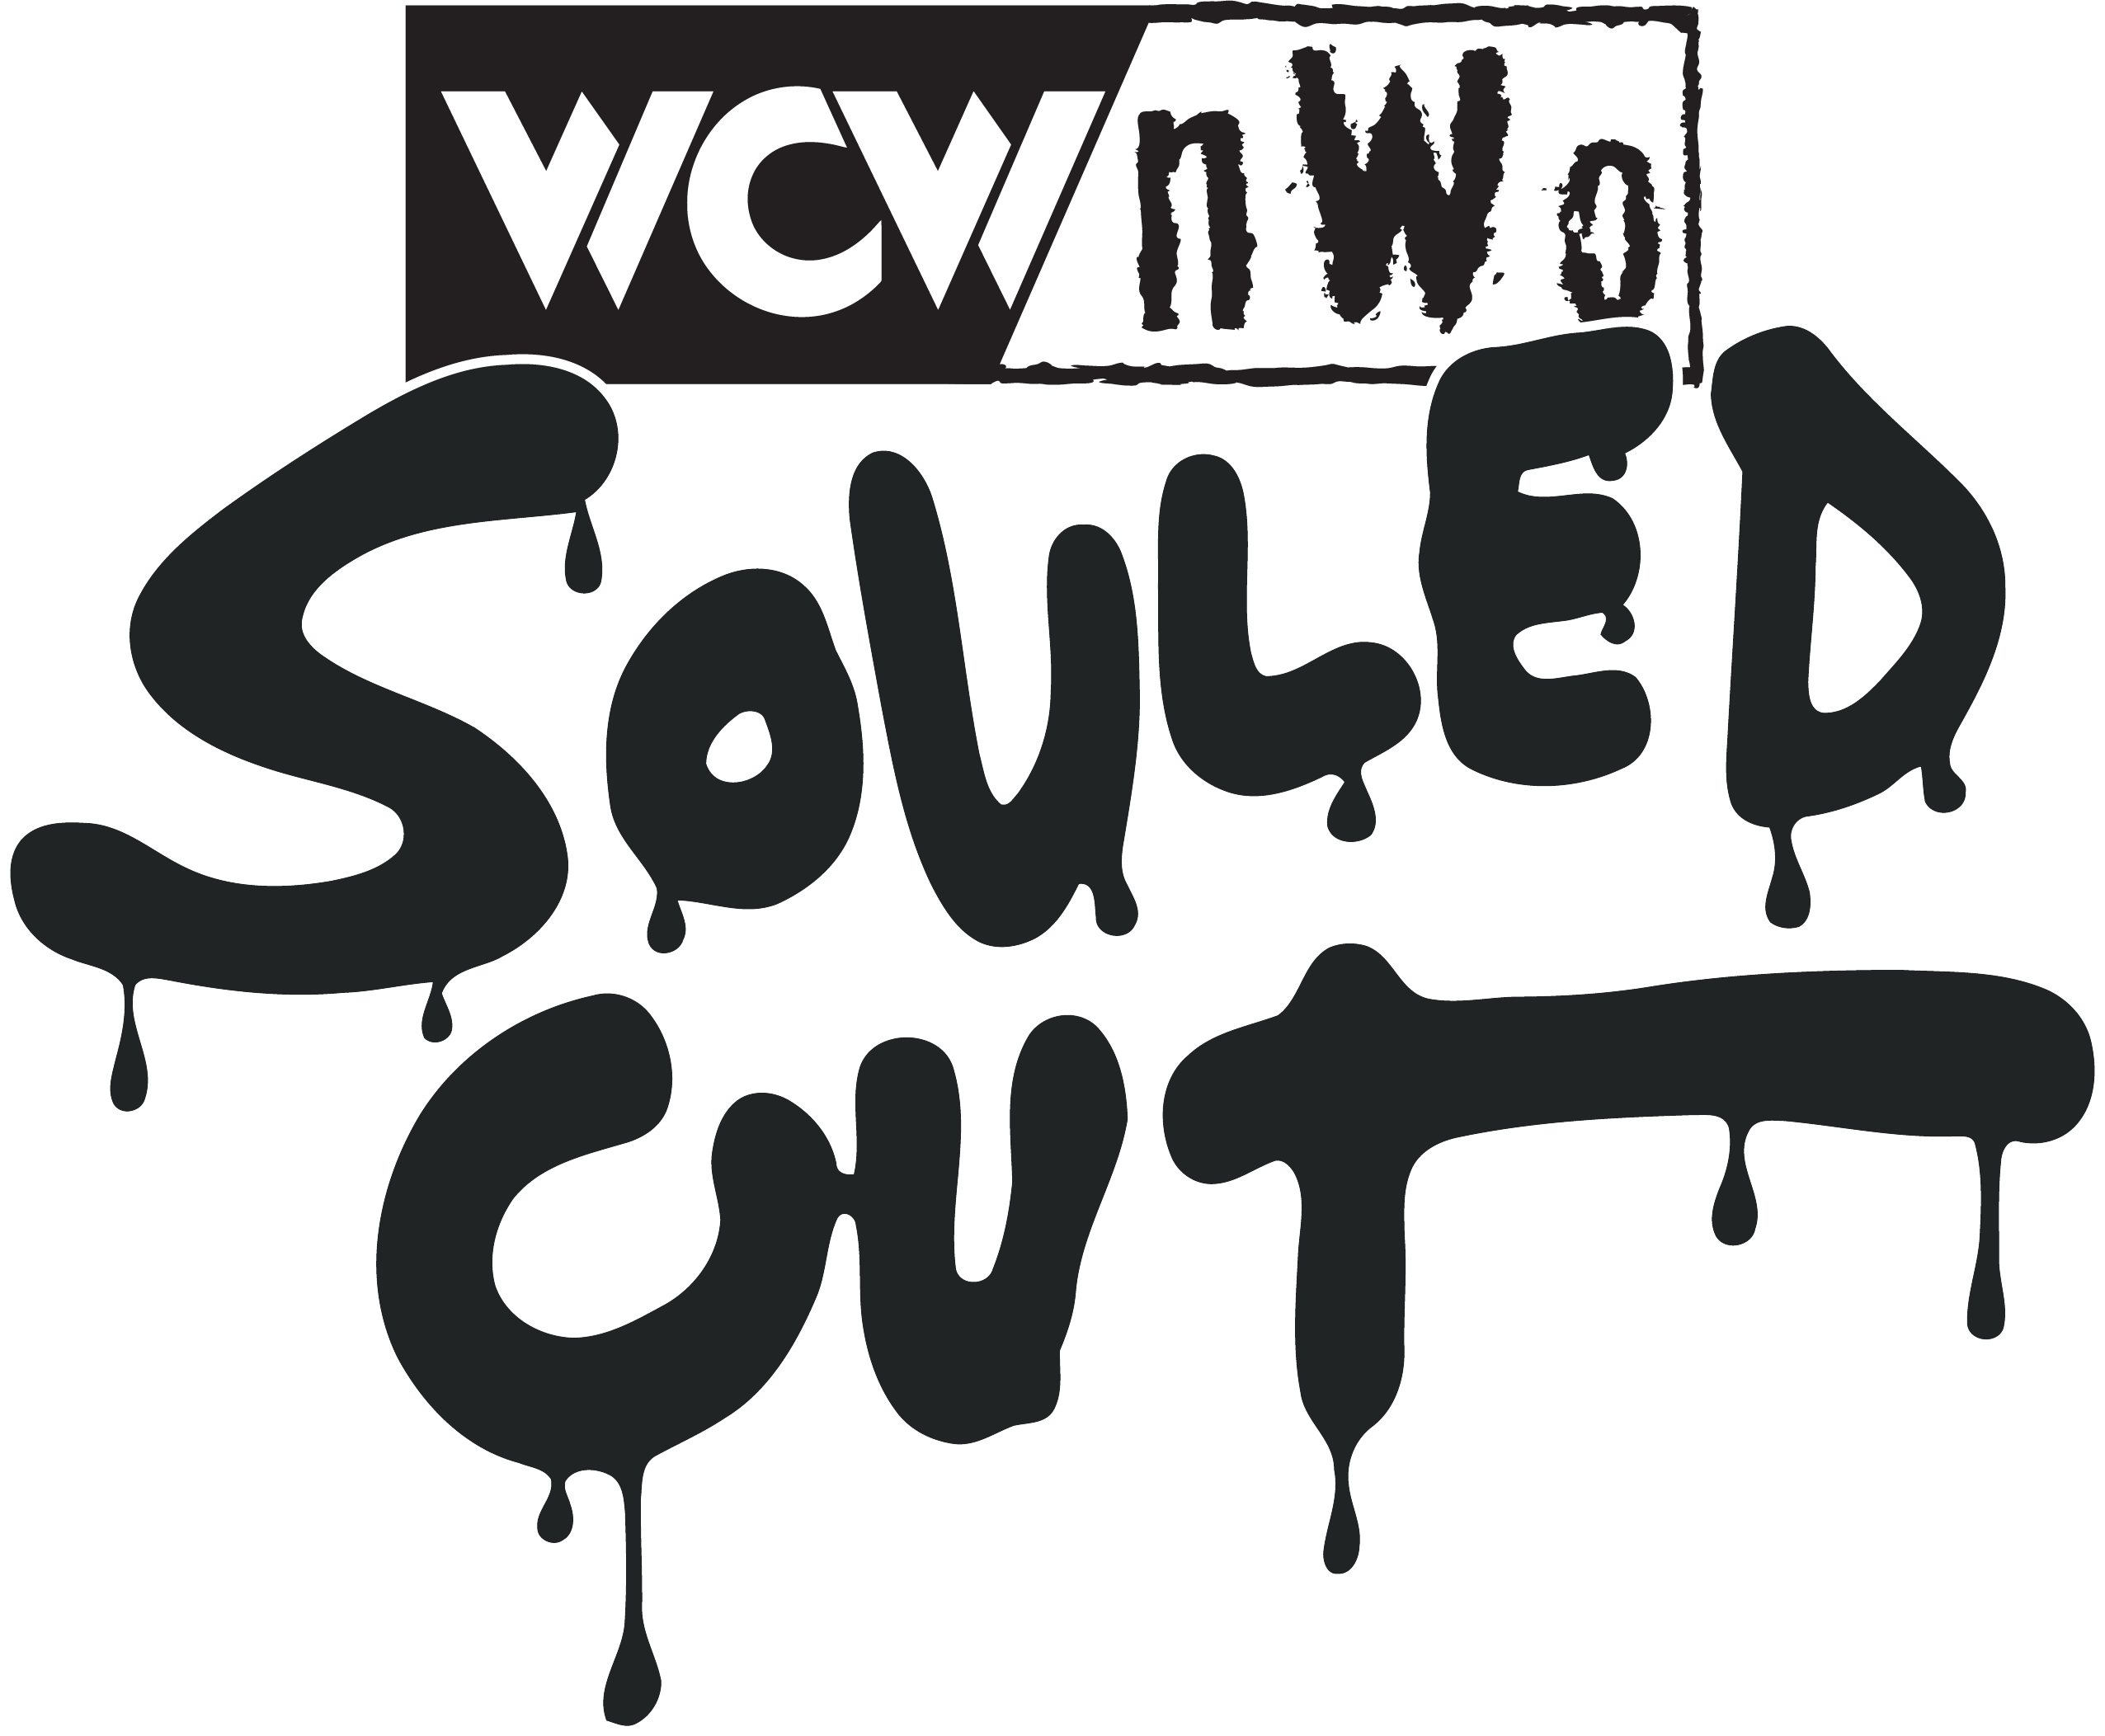 Wcw_souled_out_1998_by_b1uechr1s-d57giog.png